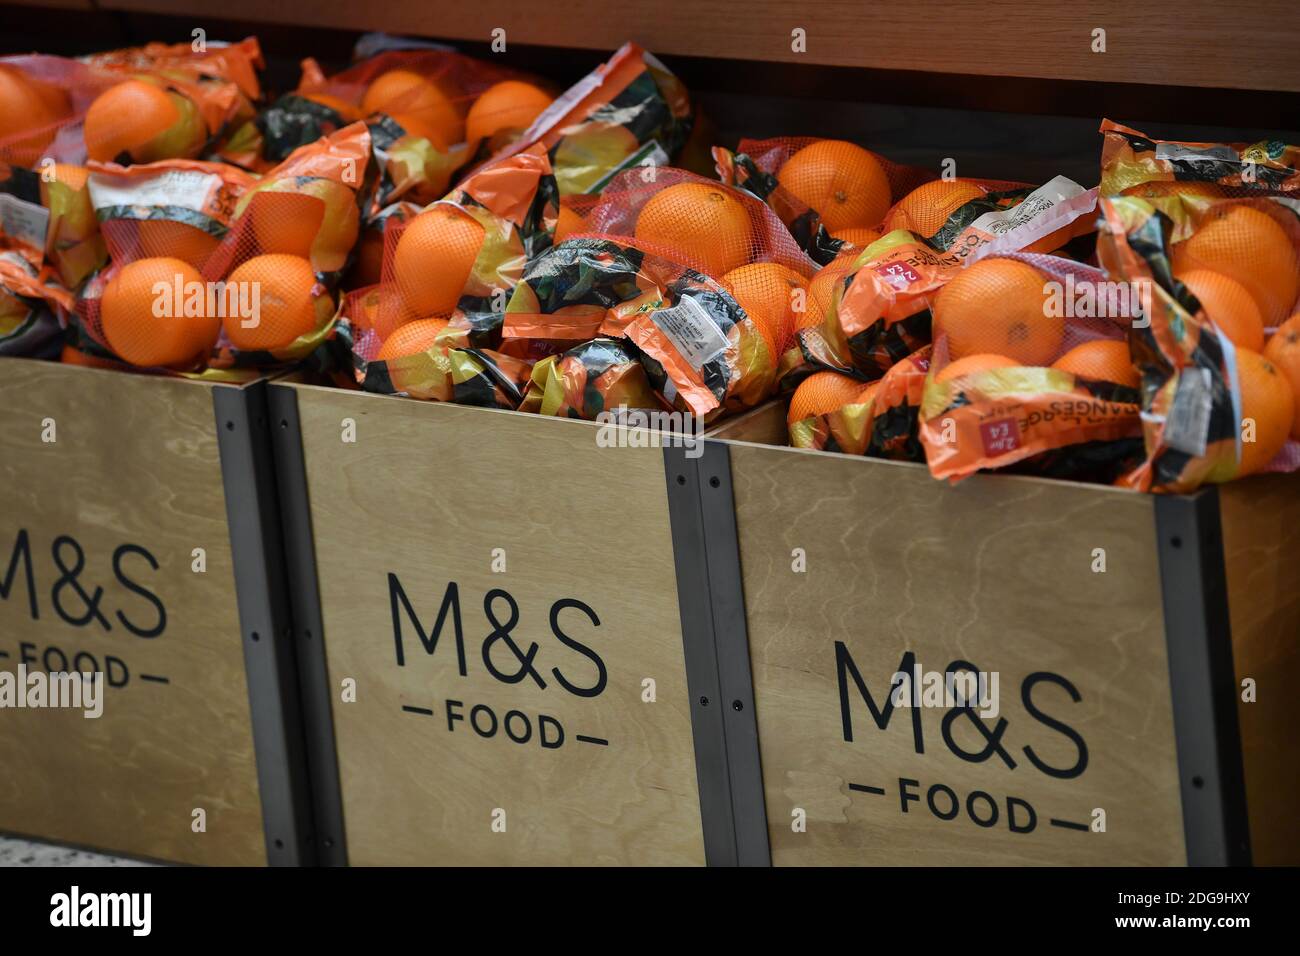 Marks & Spencer M&S Food Shop in Two Rivers, Staines, Surrey, Donnerstag, 2. Dezember 2020. Stockfoto